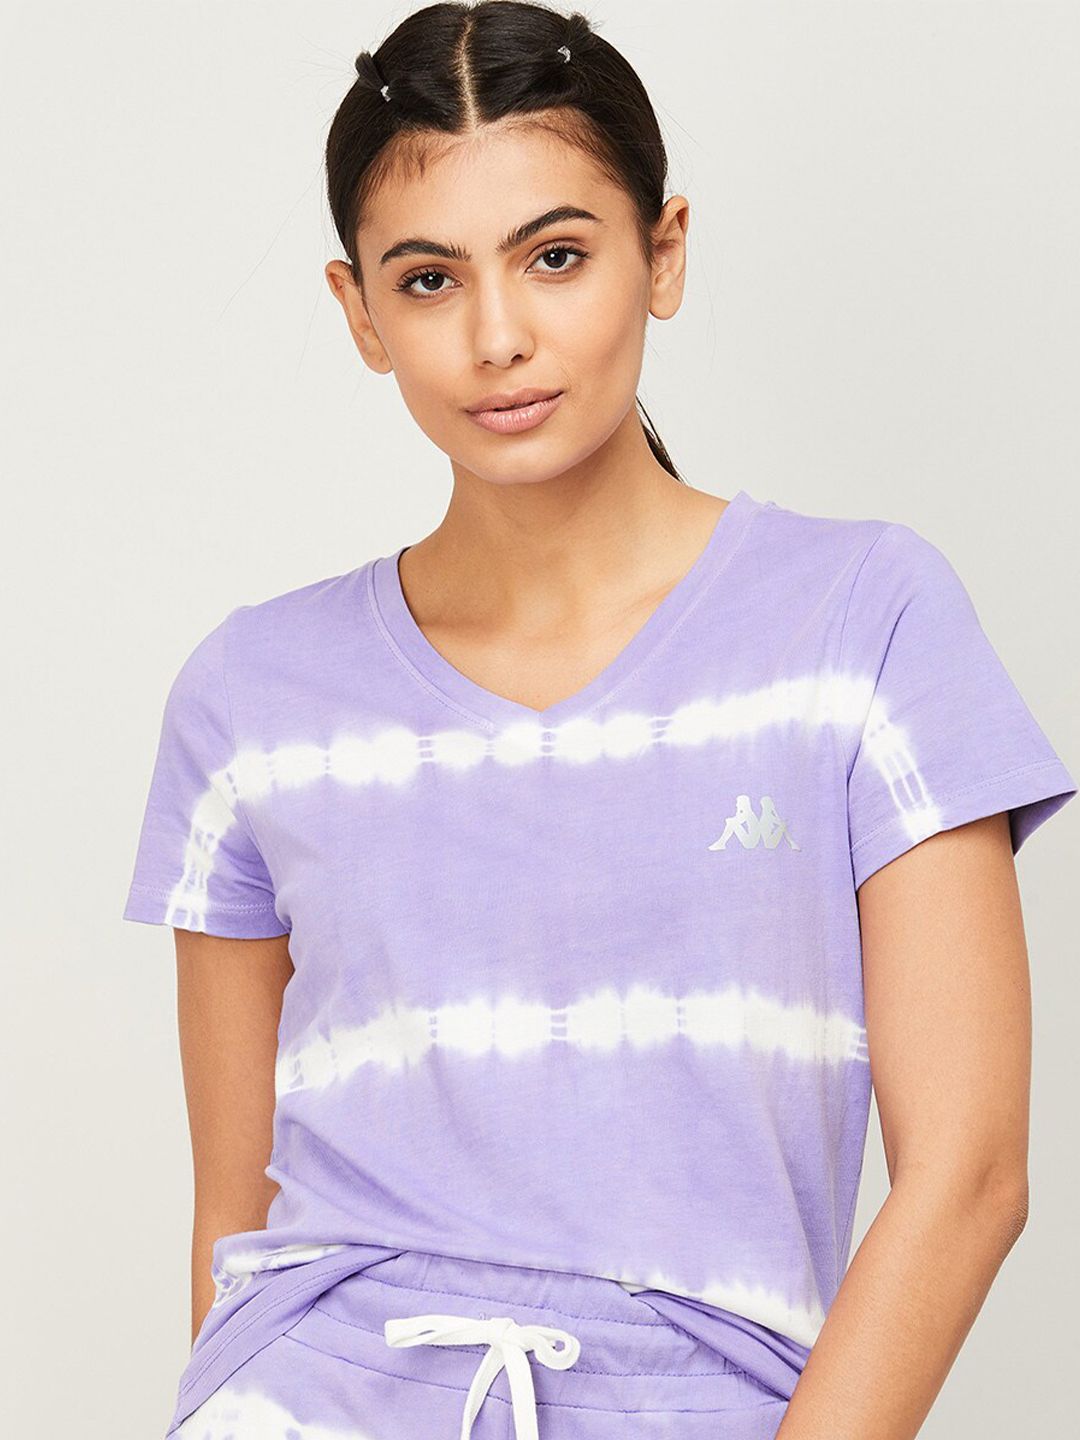 Kappa Women Lavender & White Tie and Dye V-Neck Sports T-shirt Price in India